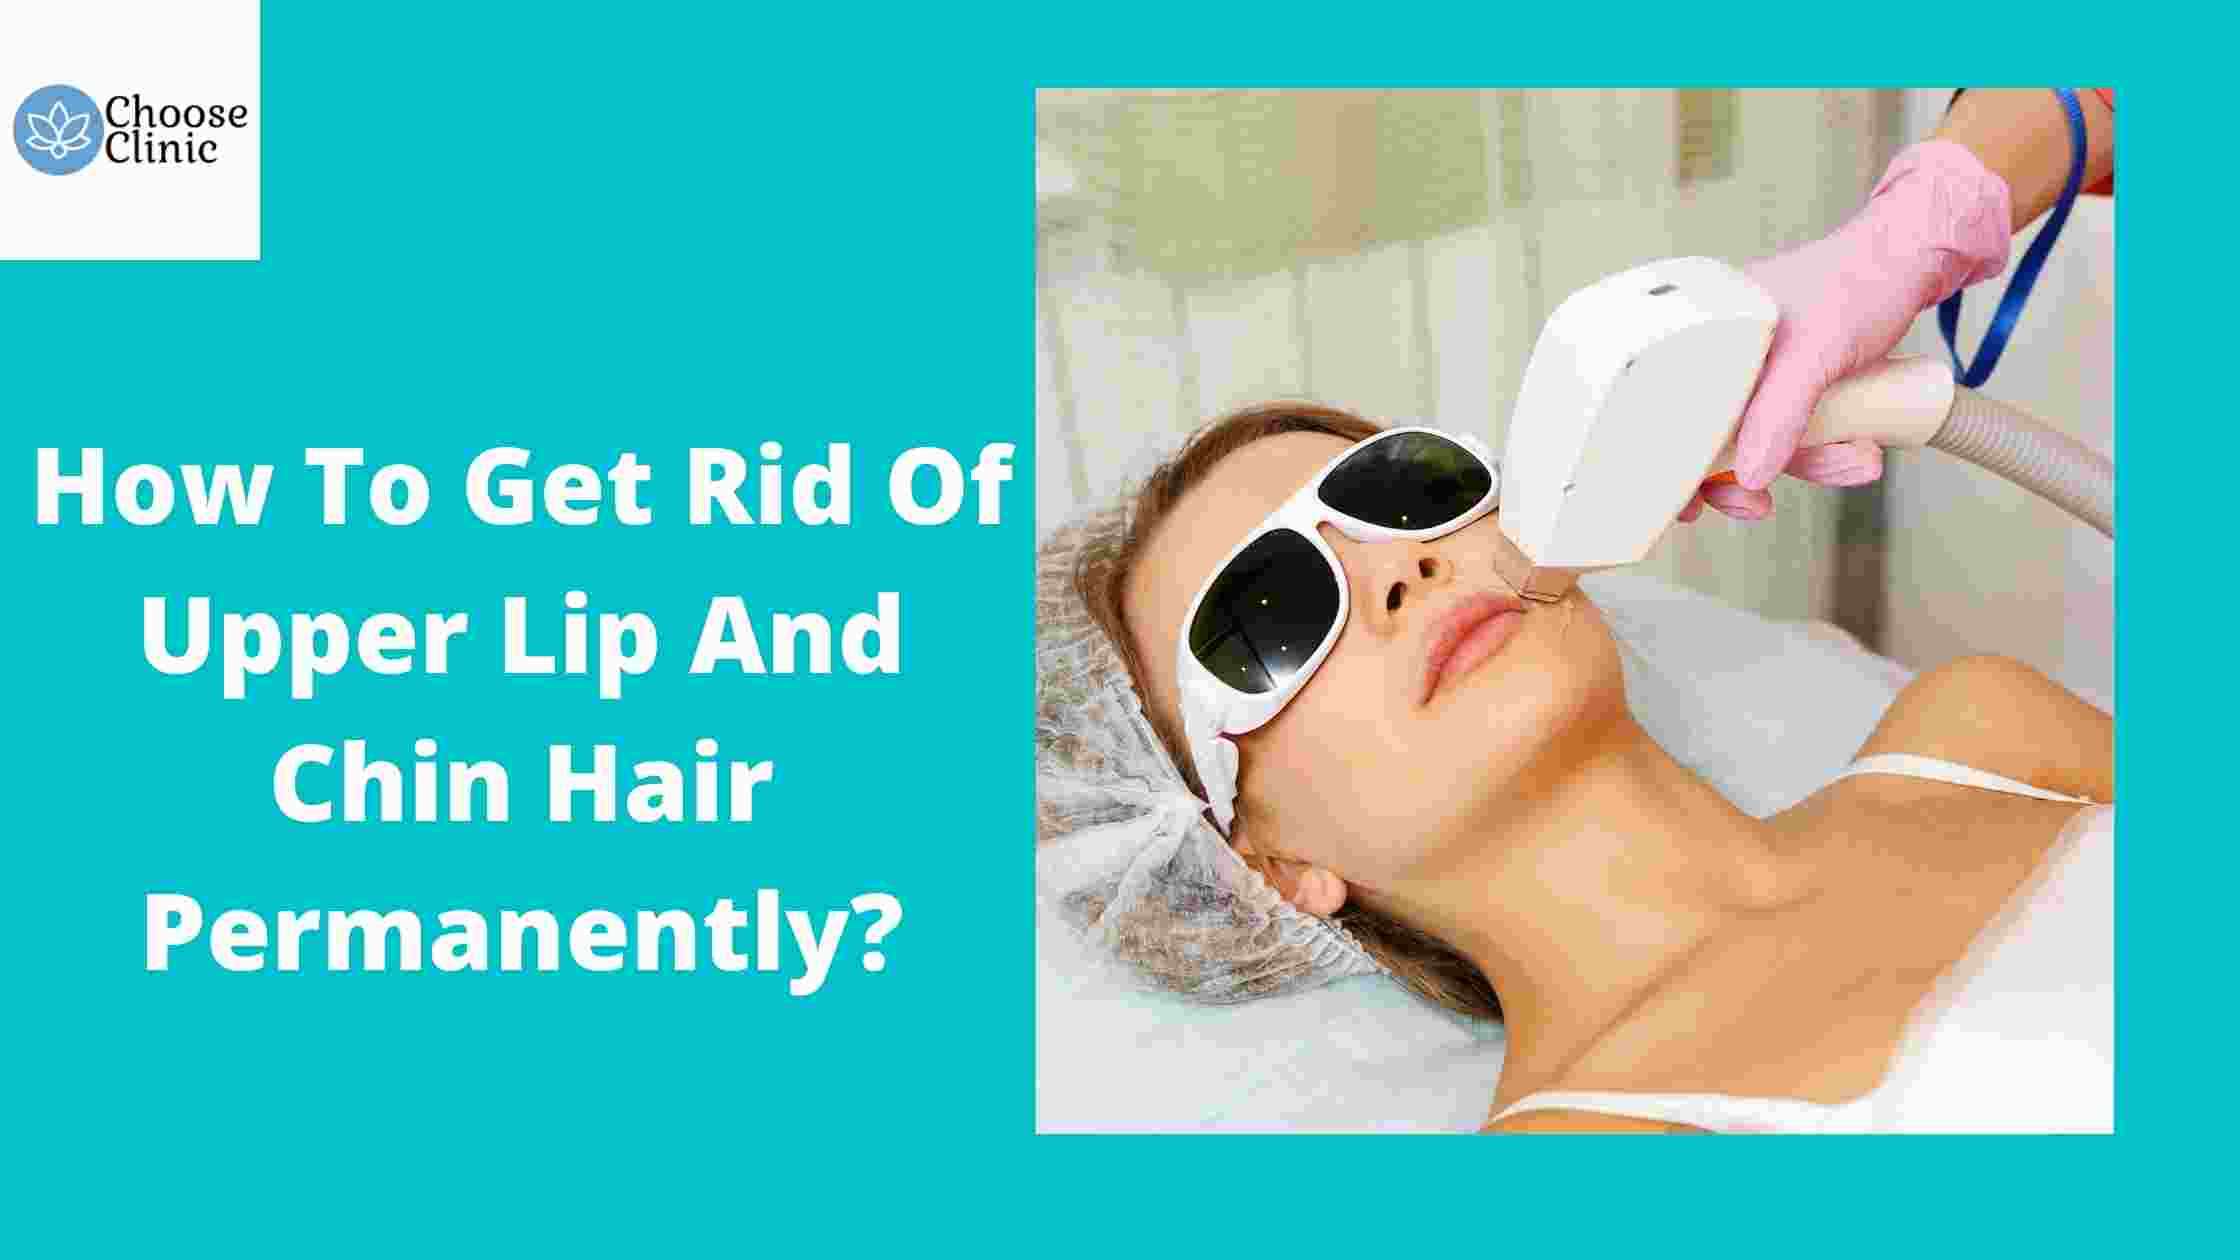 How To Get Rid Of Upper Lip And Chin Hair Permanently (1)